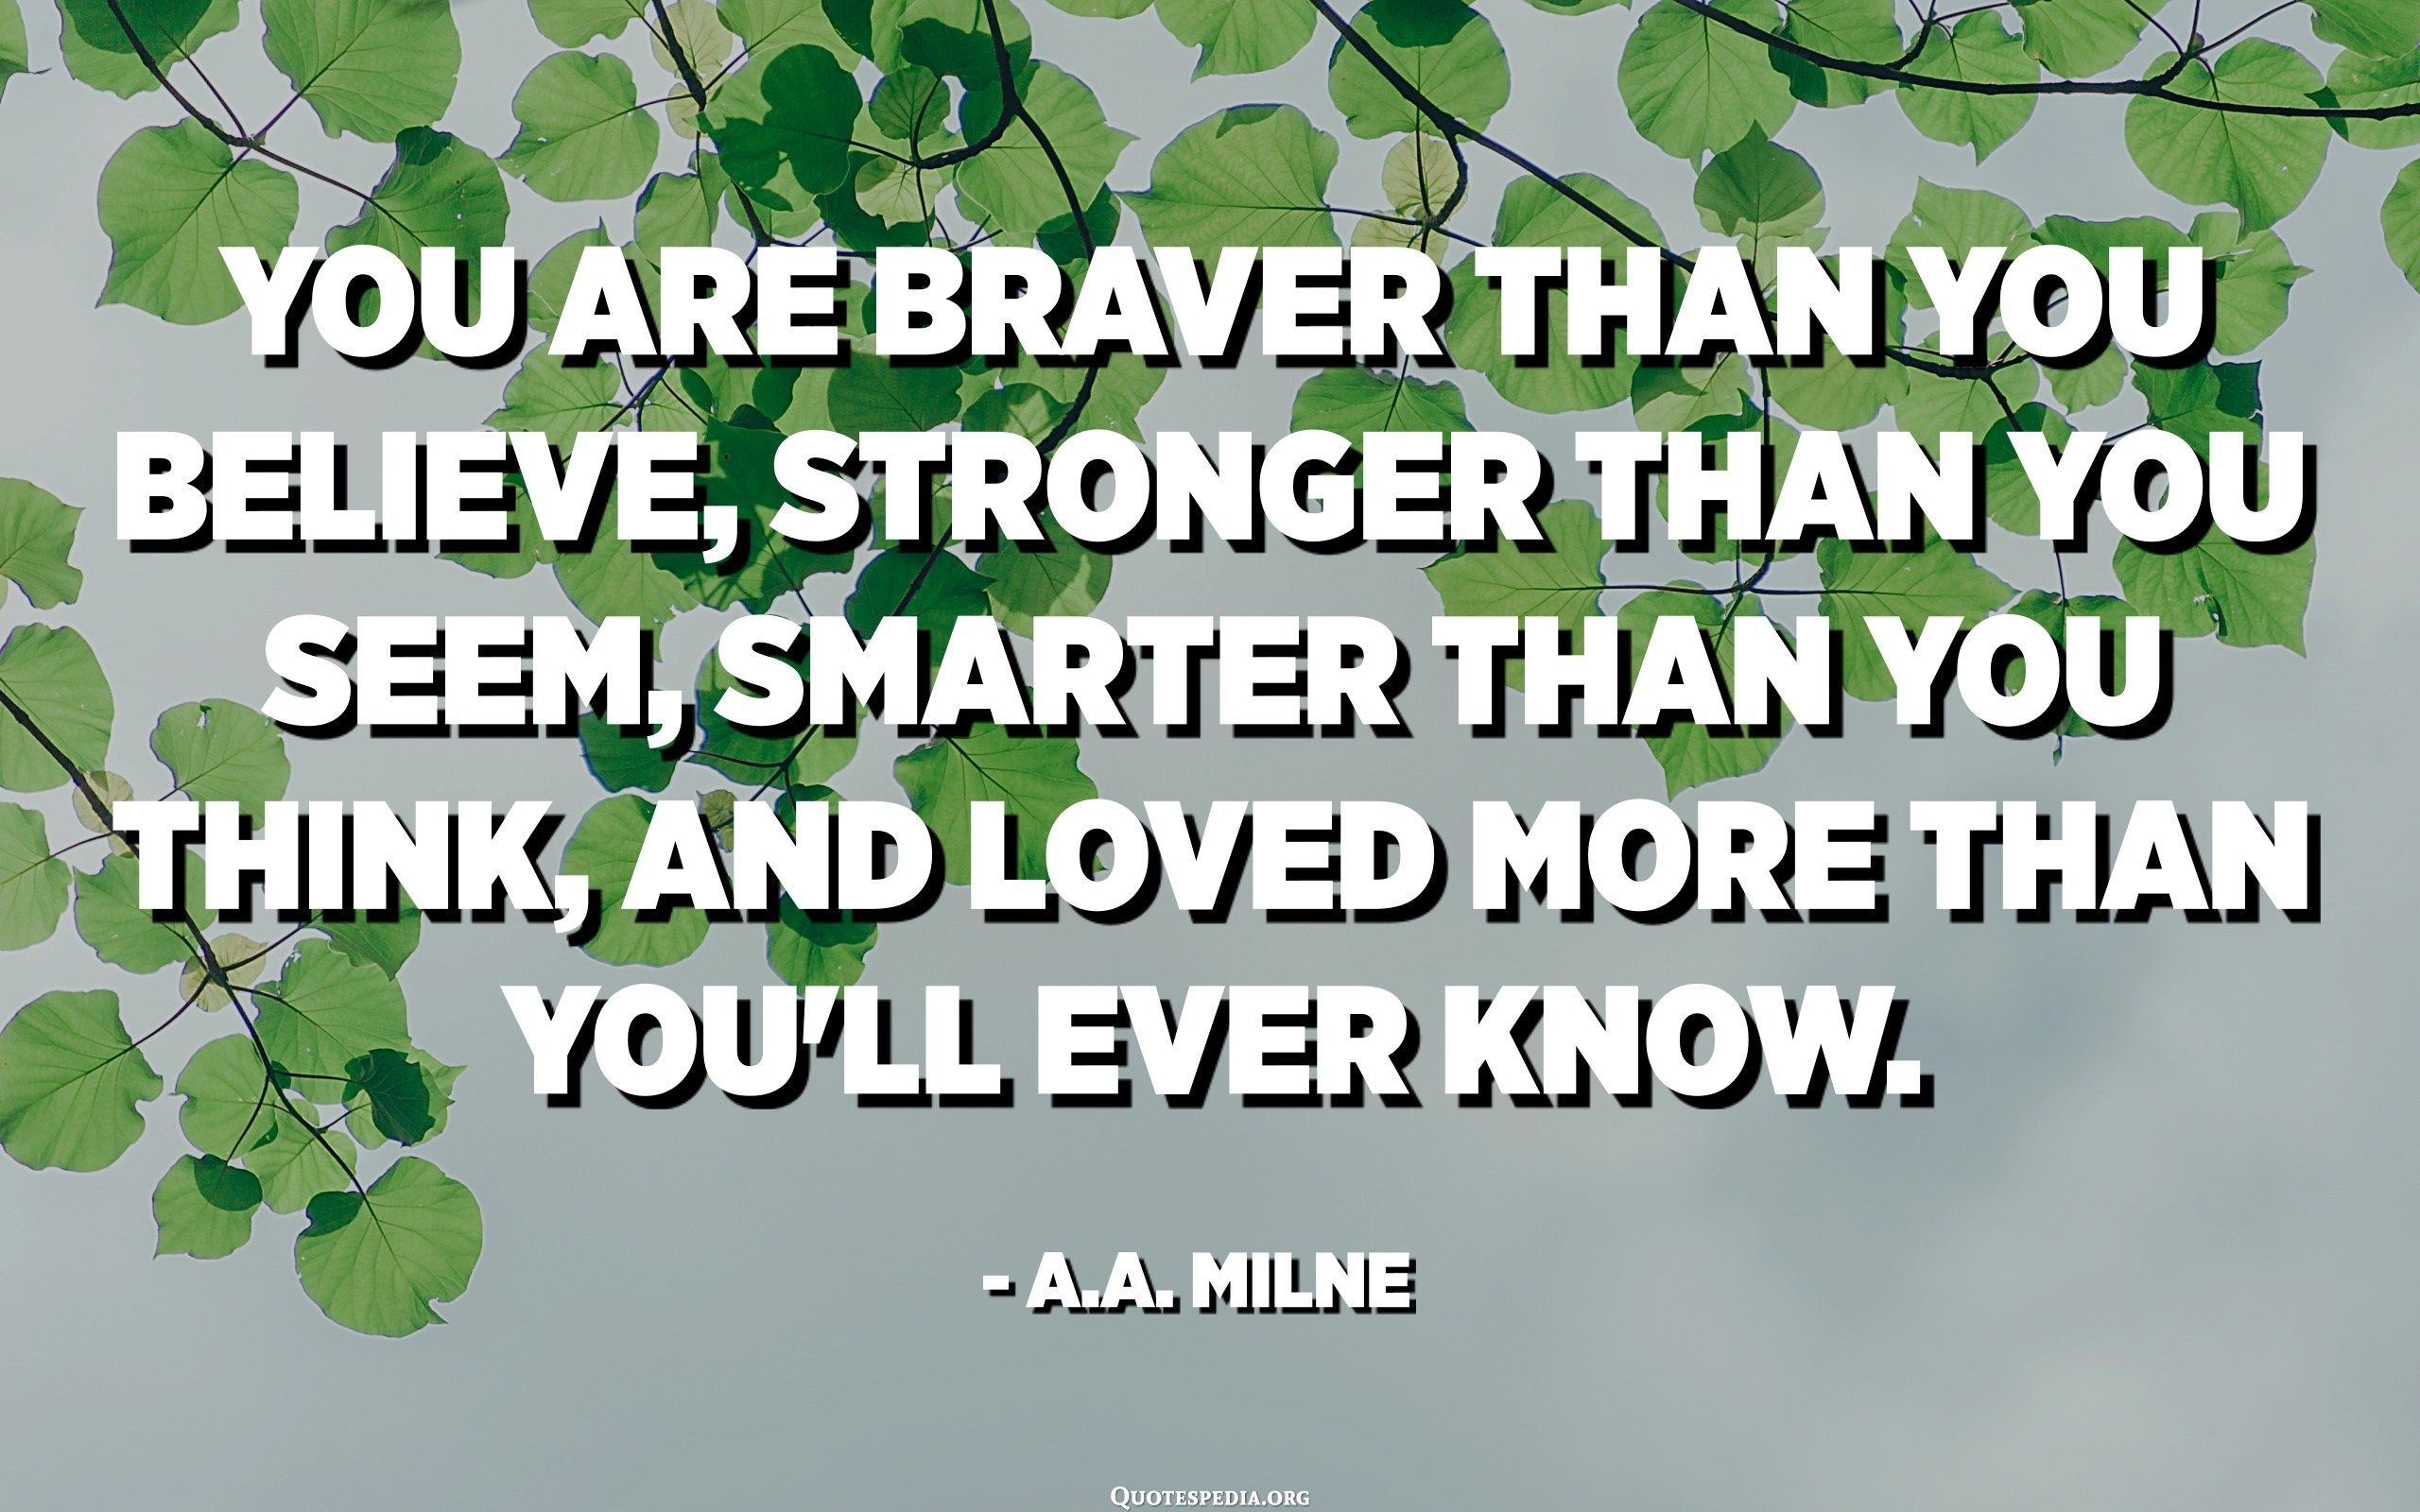 You are braver than you believe .quotespedia.org